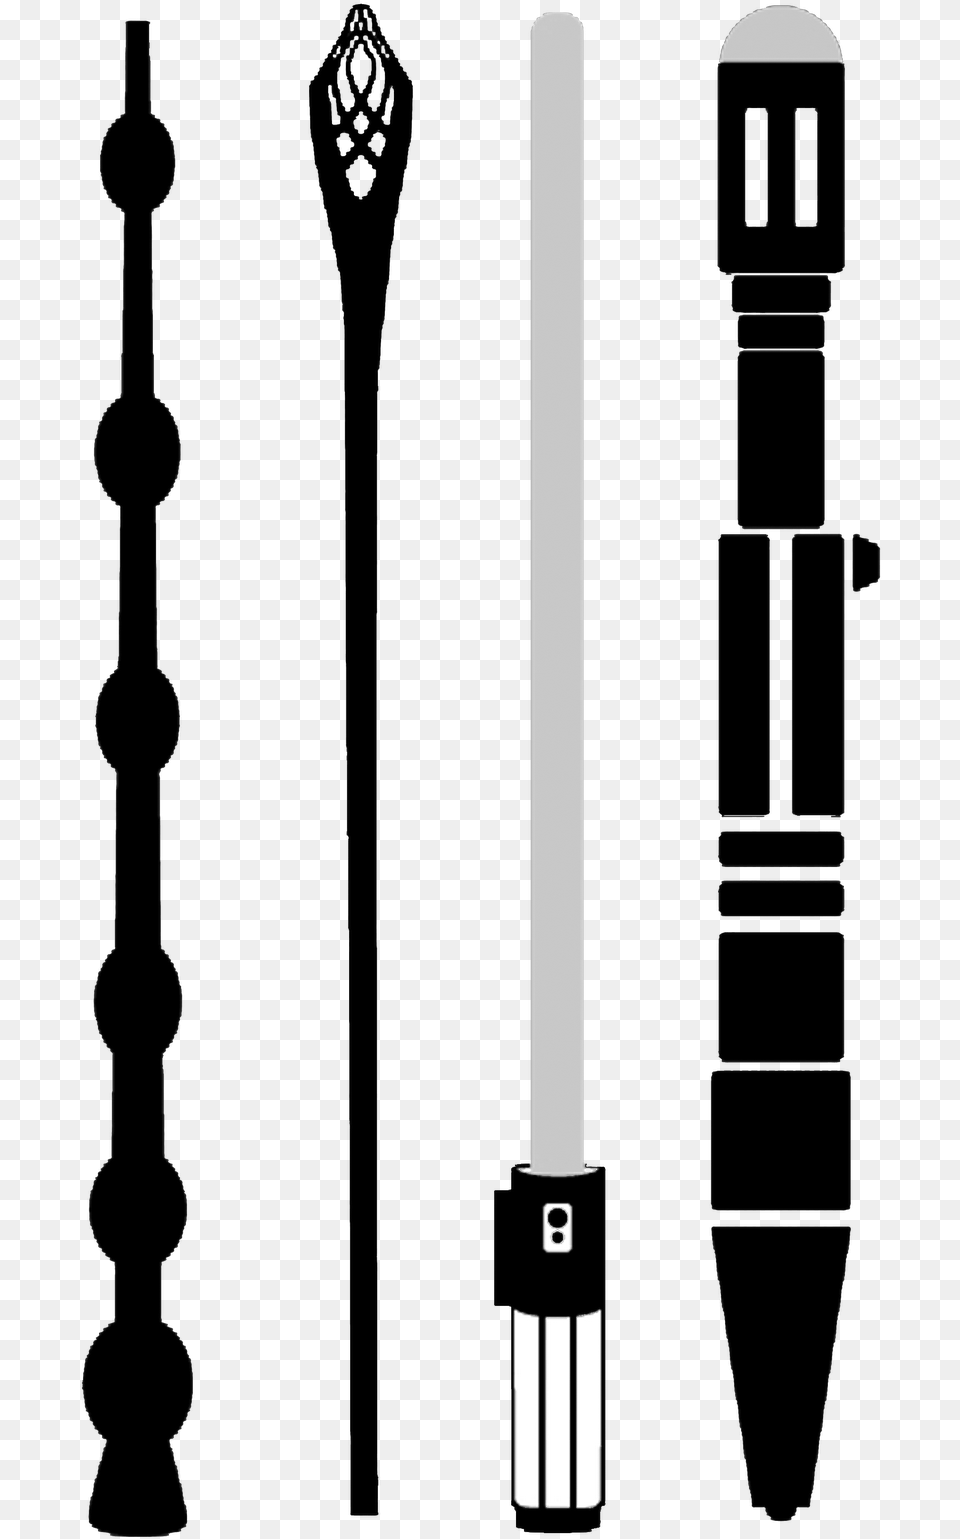 Harry Potter Wand Silhouette Harry Potter Wand Clip Art, Electrical Device, Microphone Free Png